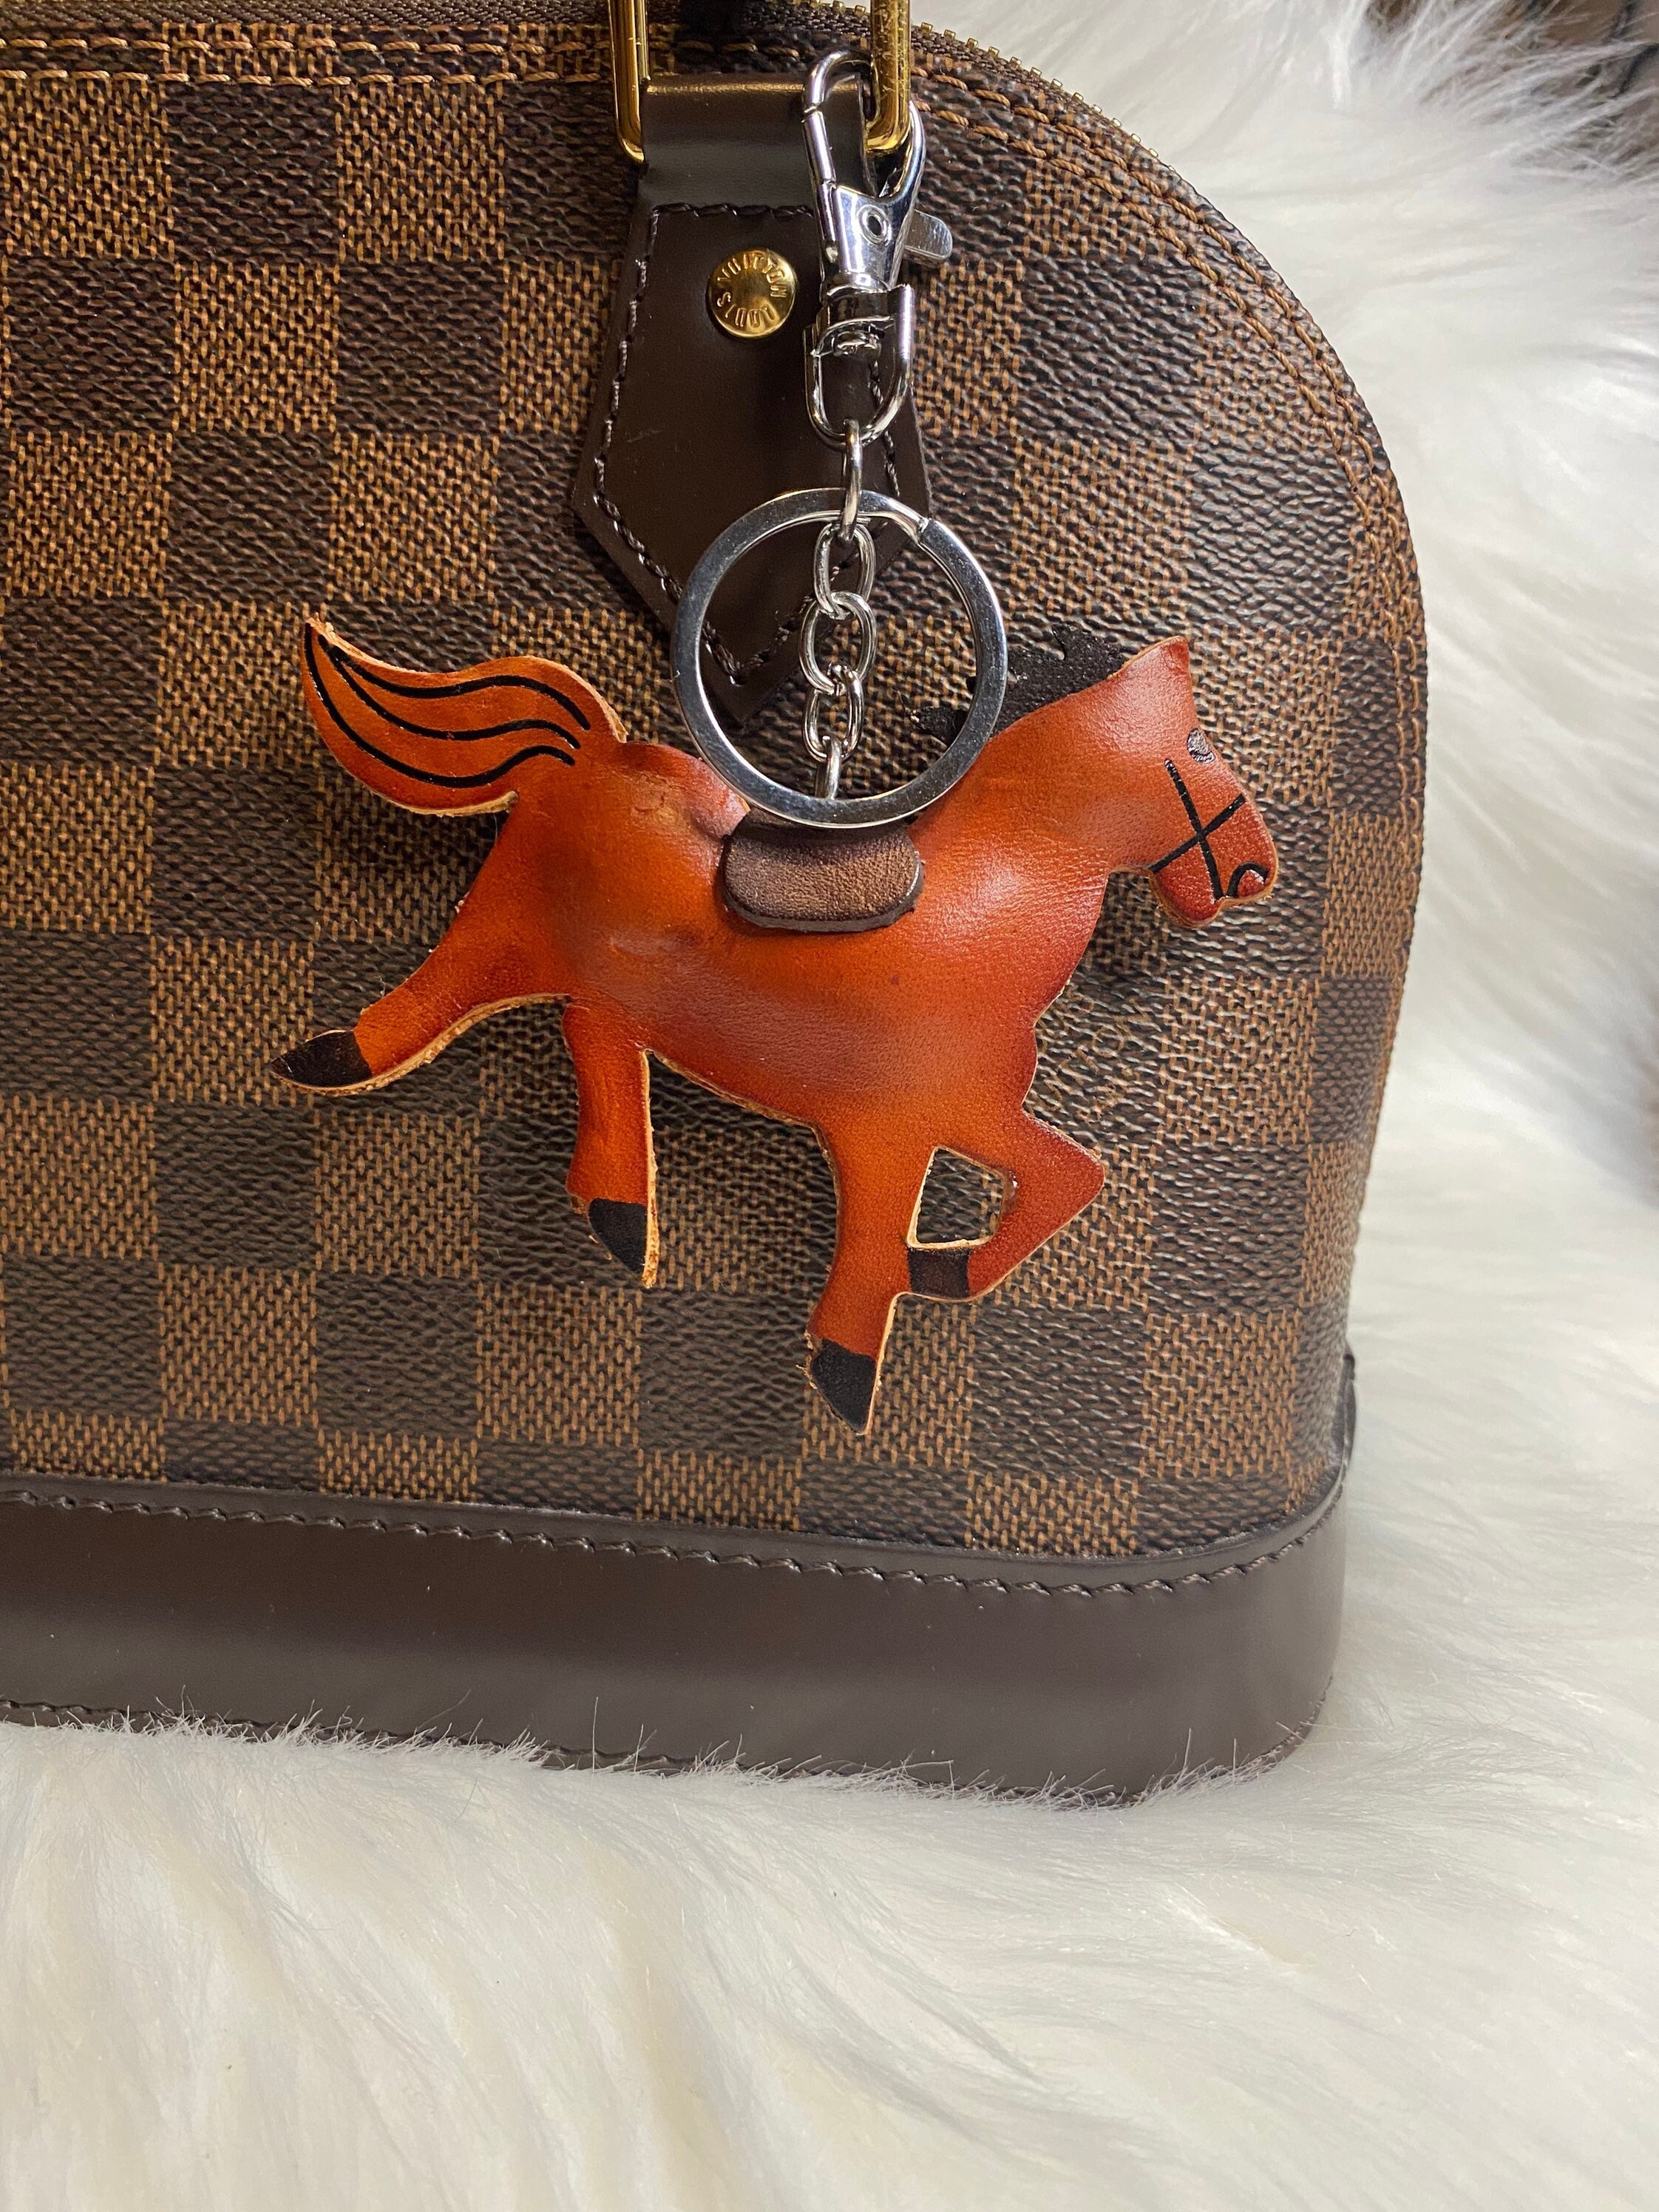  Designer keychain accessories - horse purse charms for handbags,Top  Grain Leather bag charm,purse charm,handmade fashion keychains for women,bag  charms for handbags(Blue) : Handmade Products